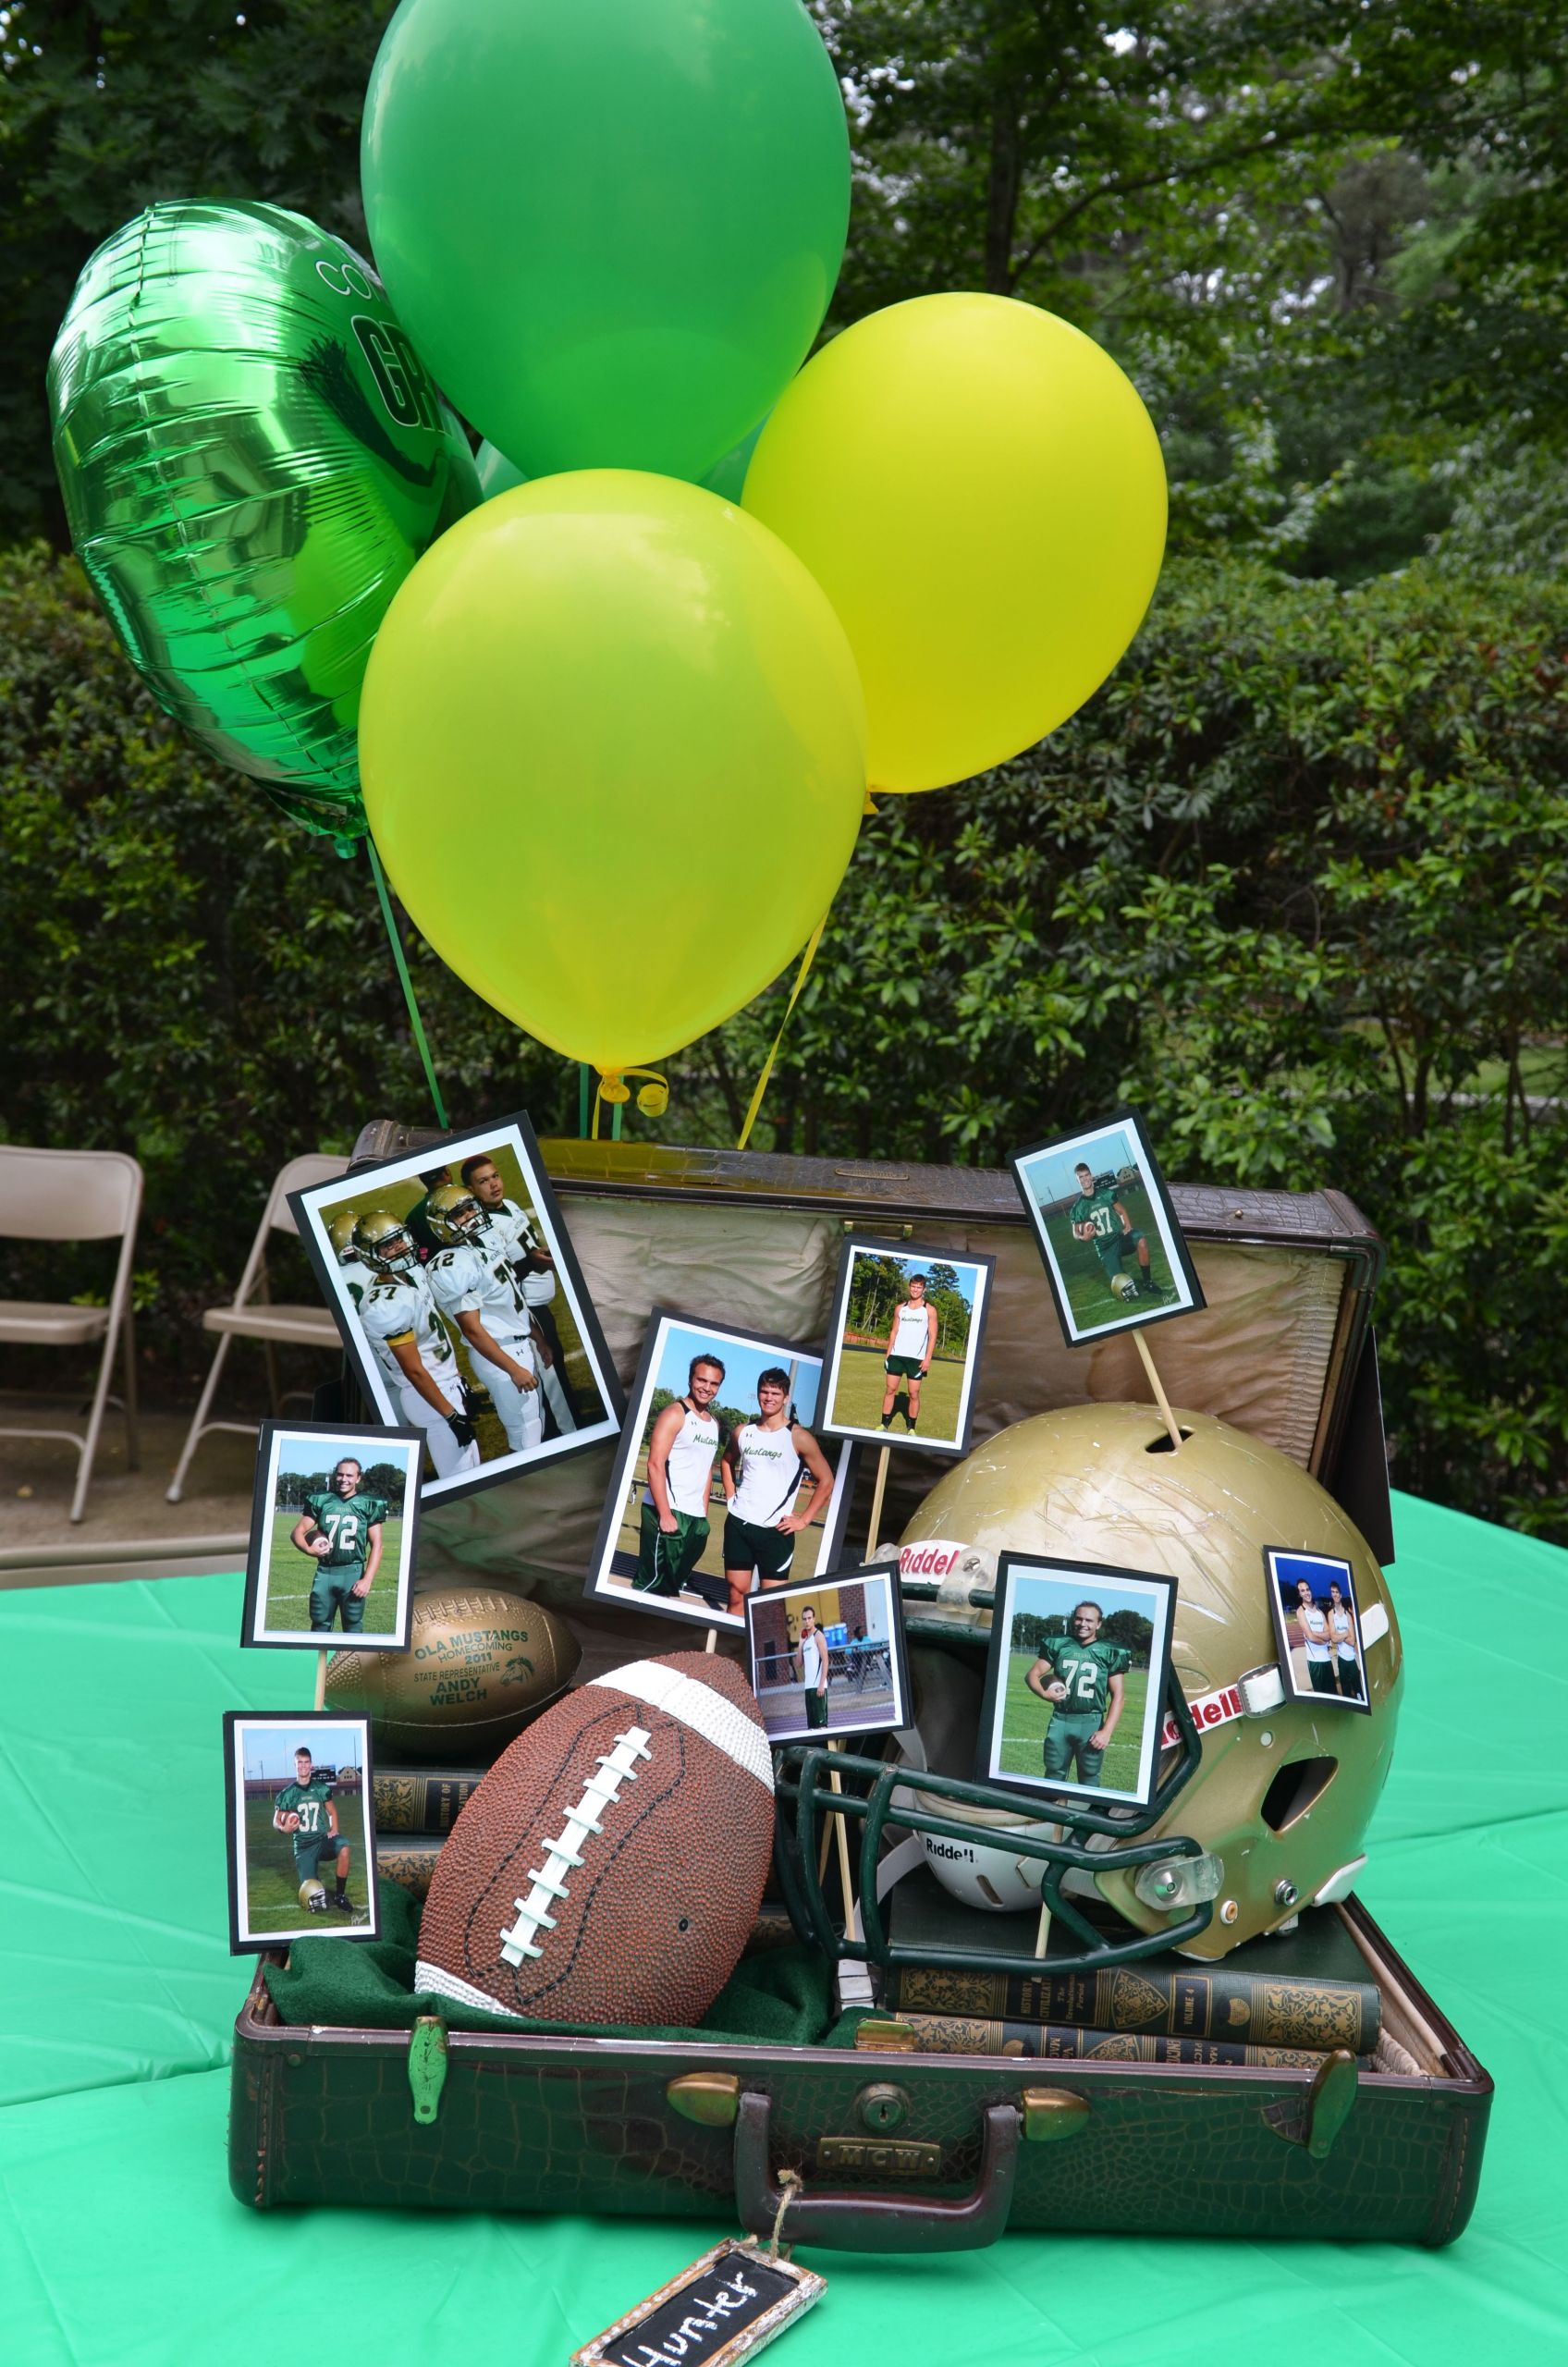 Boy High School Graduation Party Ideas
 Centerpiece for Boys could easily change this up for